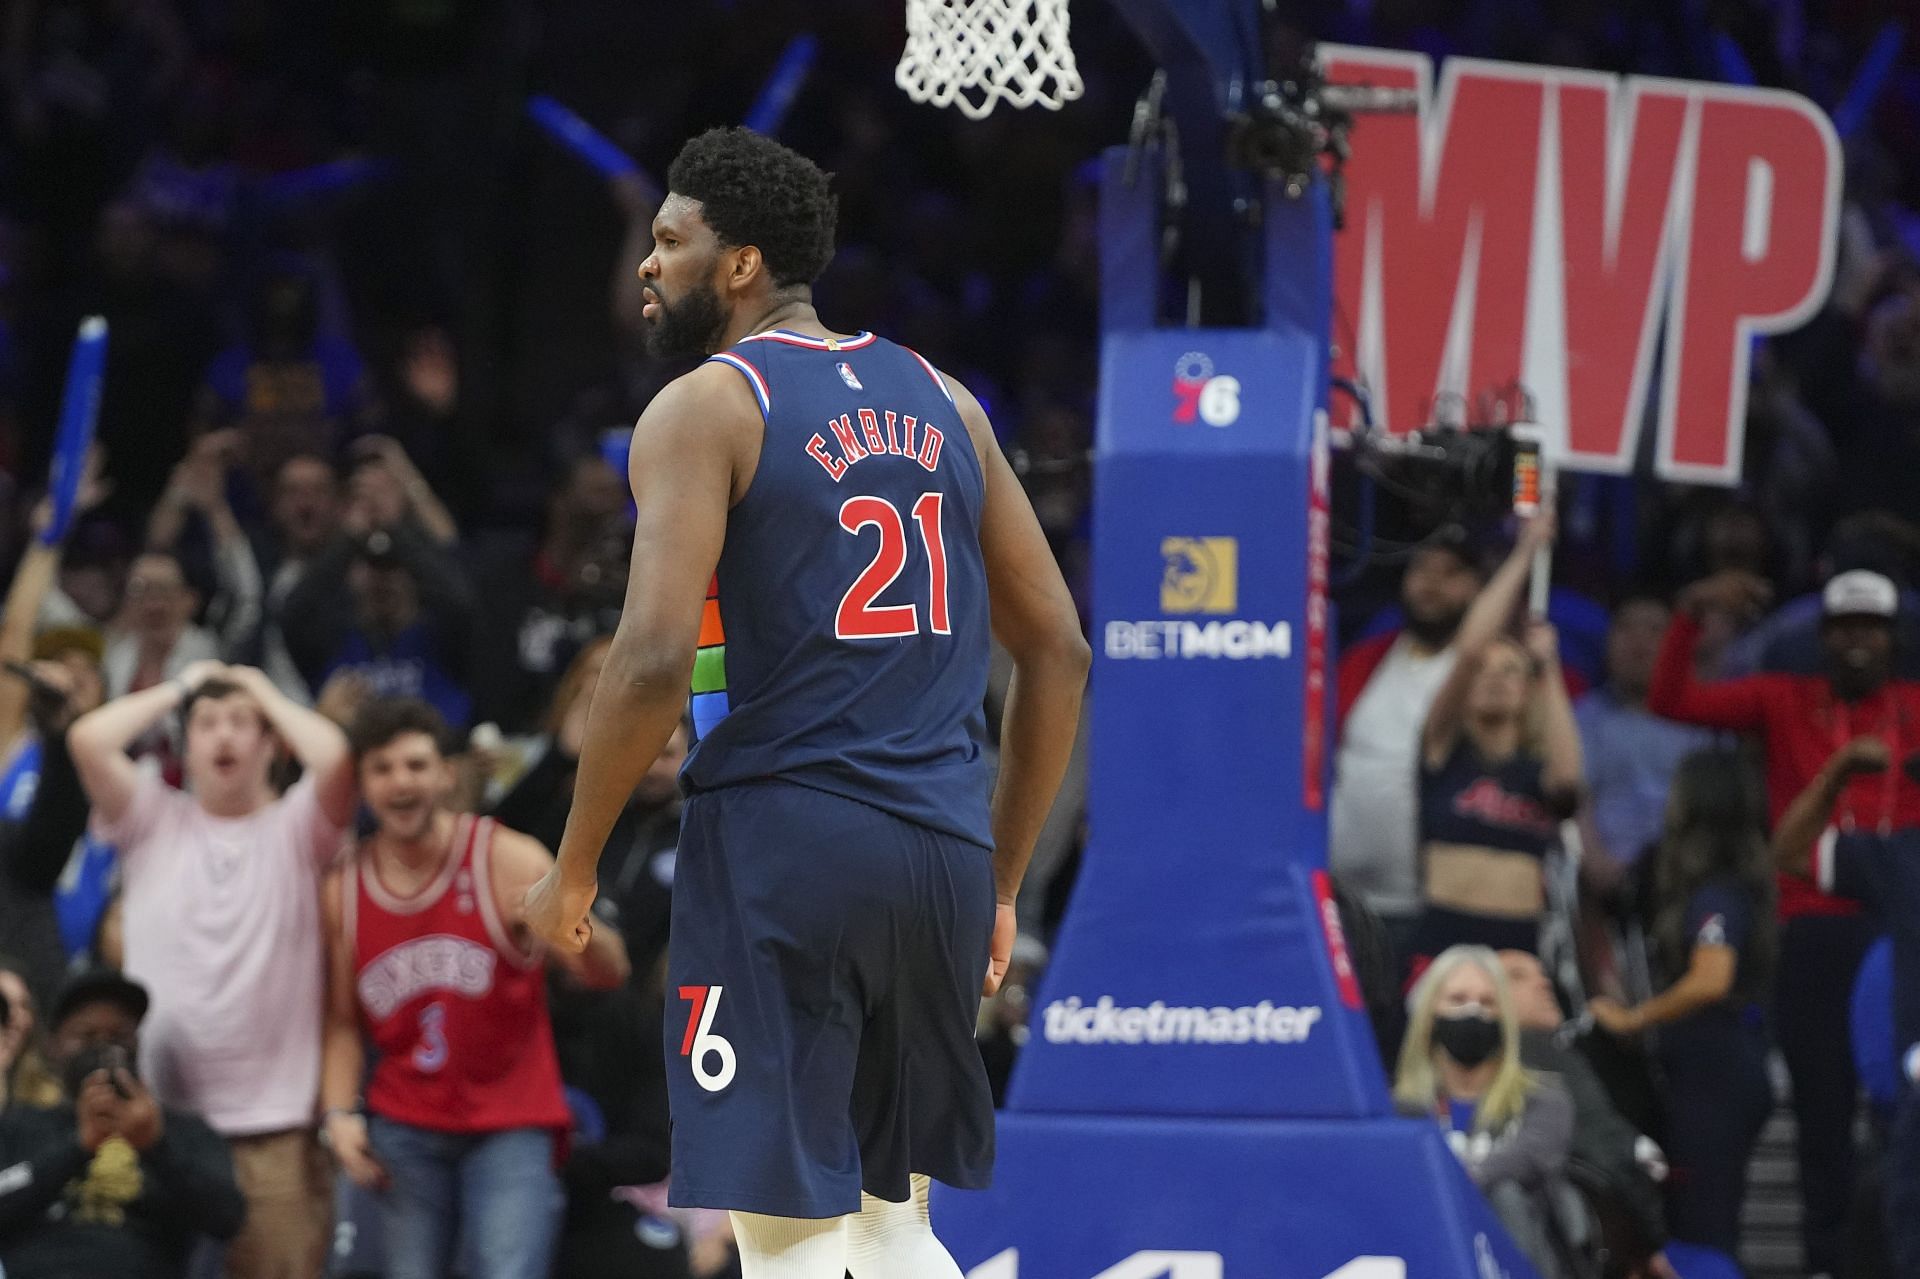 Joel Embiid #21 of the Philadelphia 76ers reacts against the Chicago Bulls in the second half at the Wells Fargo Center on March 7, 2022 in Philadelphia, Pennsylvania. The 76ers defeated the Bulls 121-106.